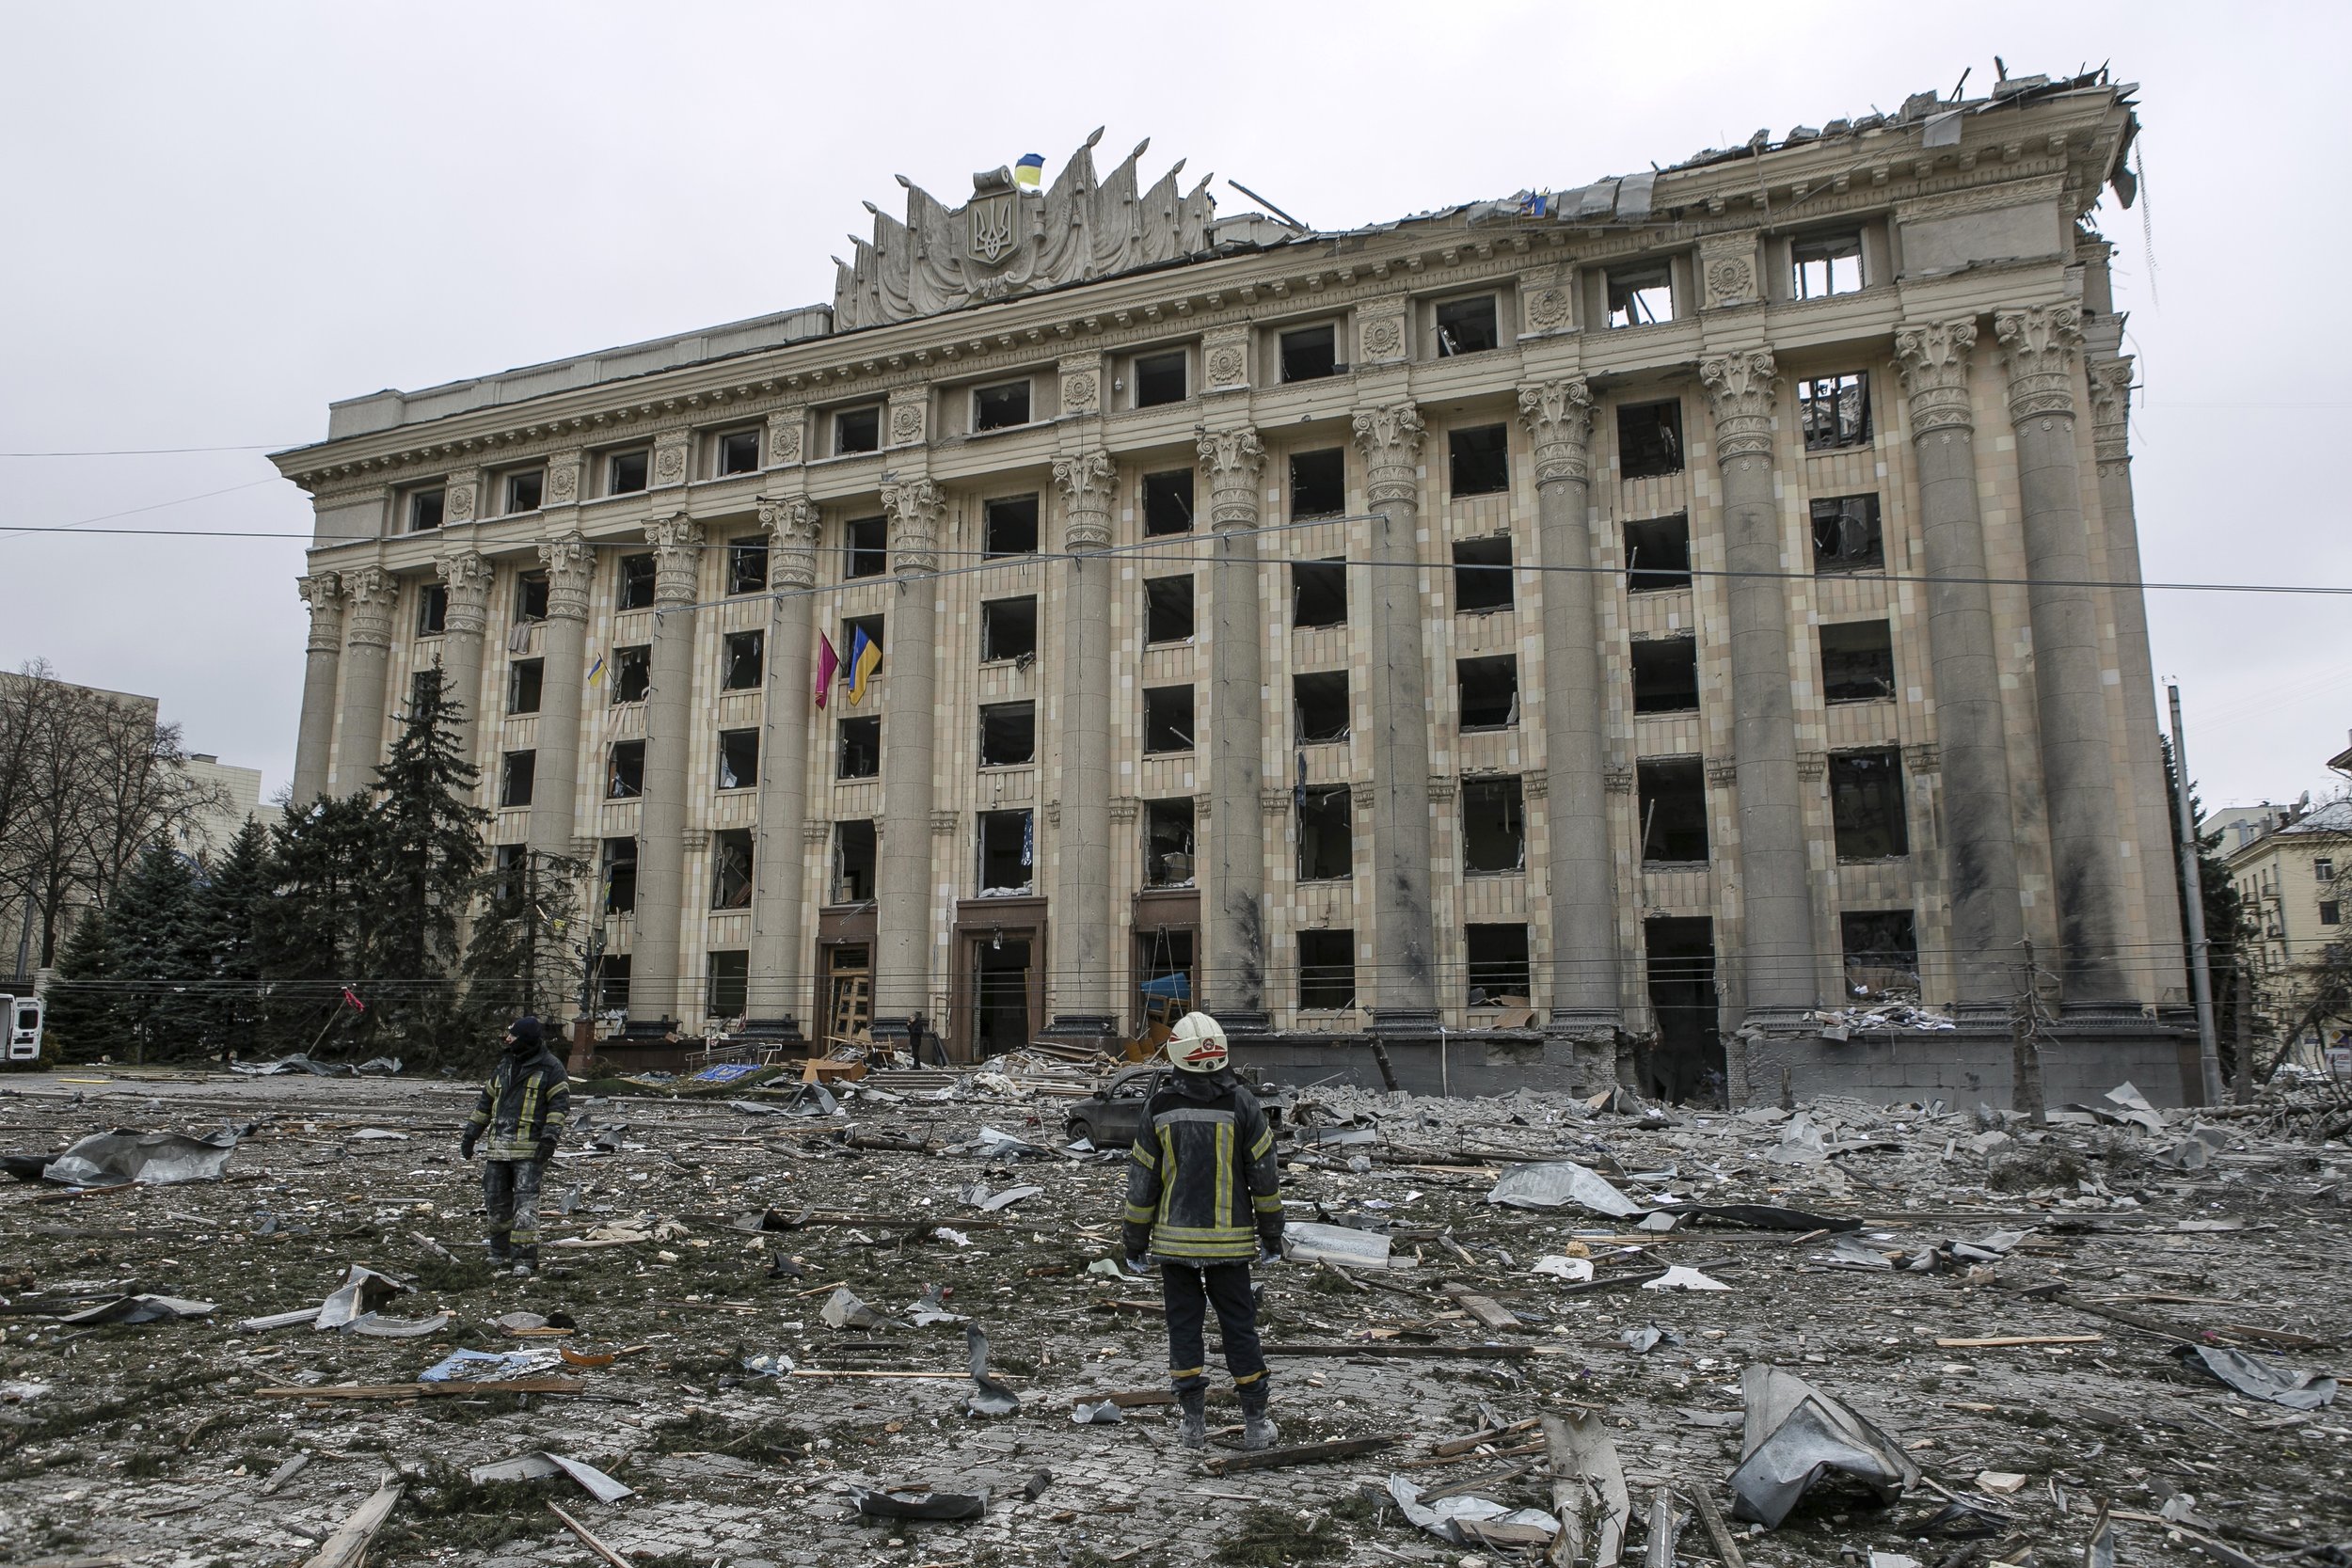  A member of the Ukrainian Emergency Service looks at the City Hall building in the central square following shelling in Kharkiv, Ukraine, Tuesday, March 1, 2022. Russian strikes pounded the central square in UkraineÕs second-largest city and other c